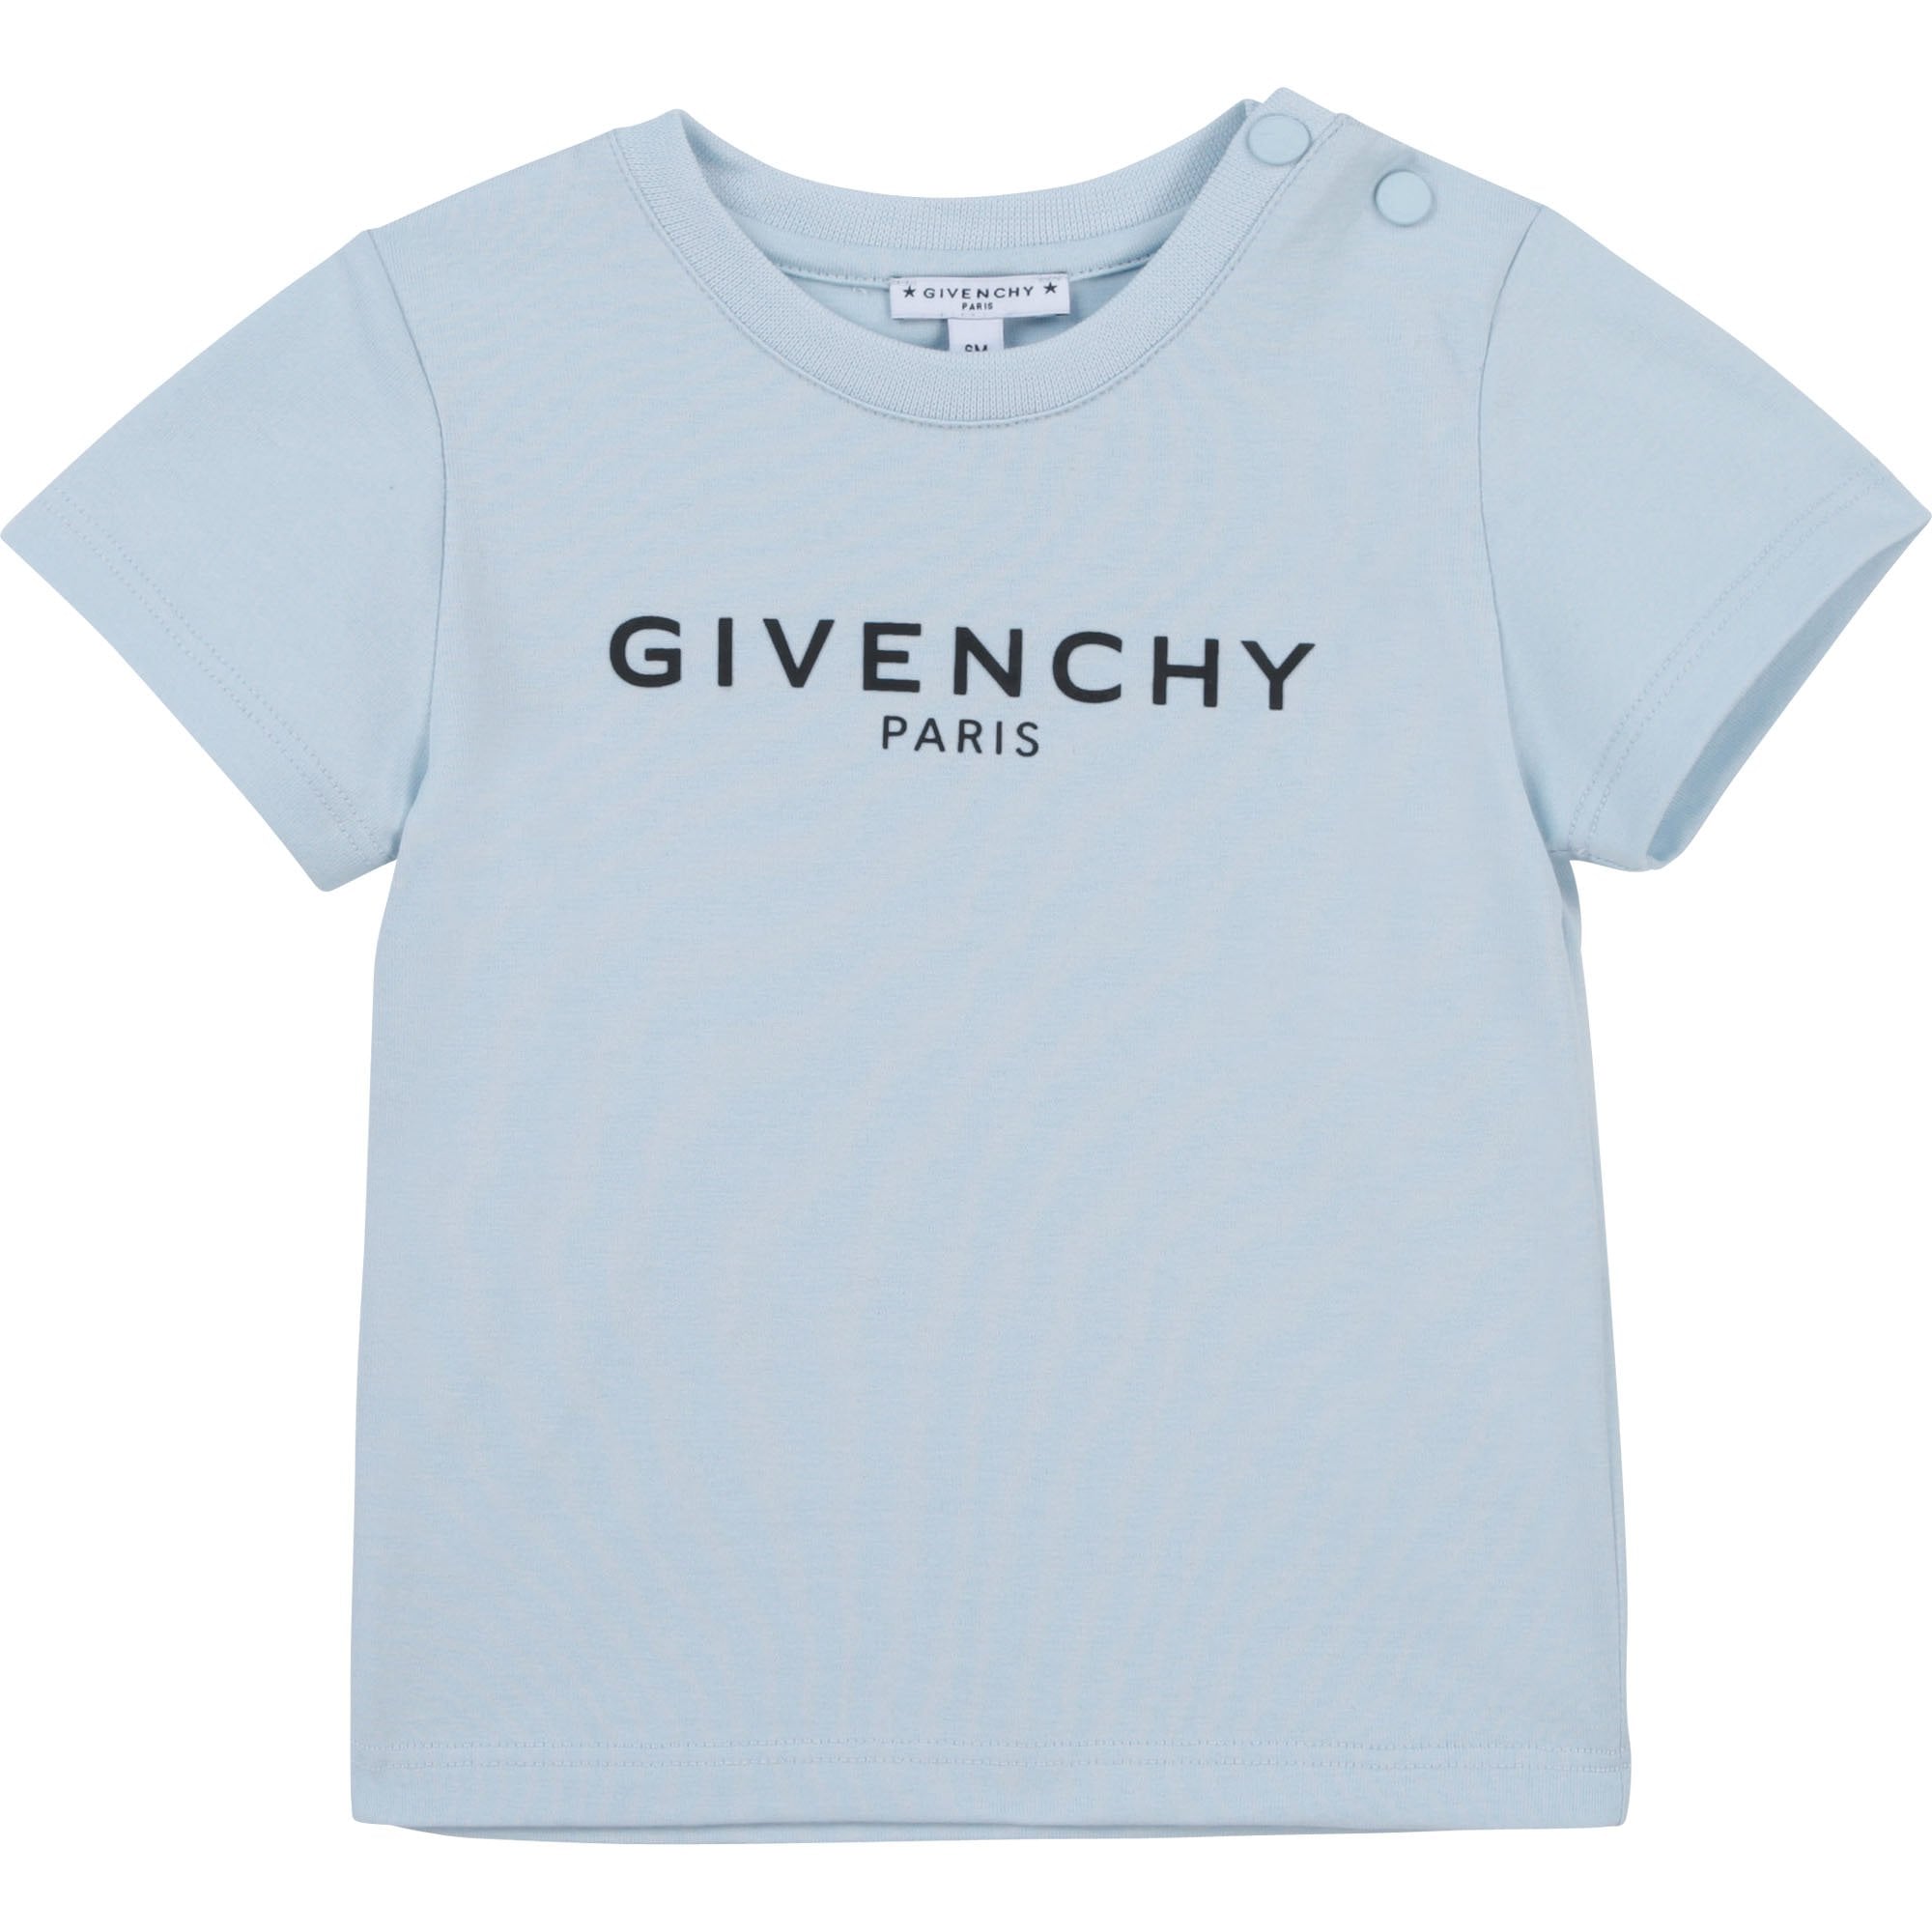 Givenchy Baby Boys Cotton T-shirt Blue - BLUE 2Y